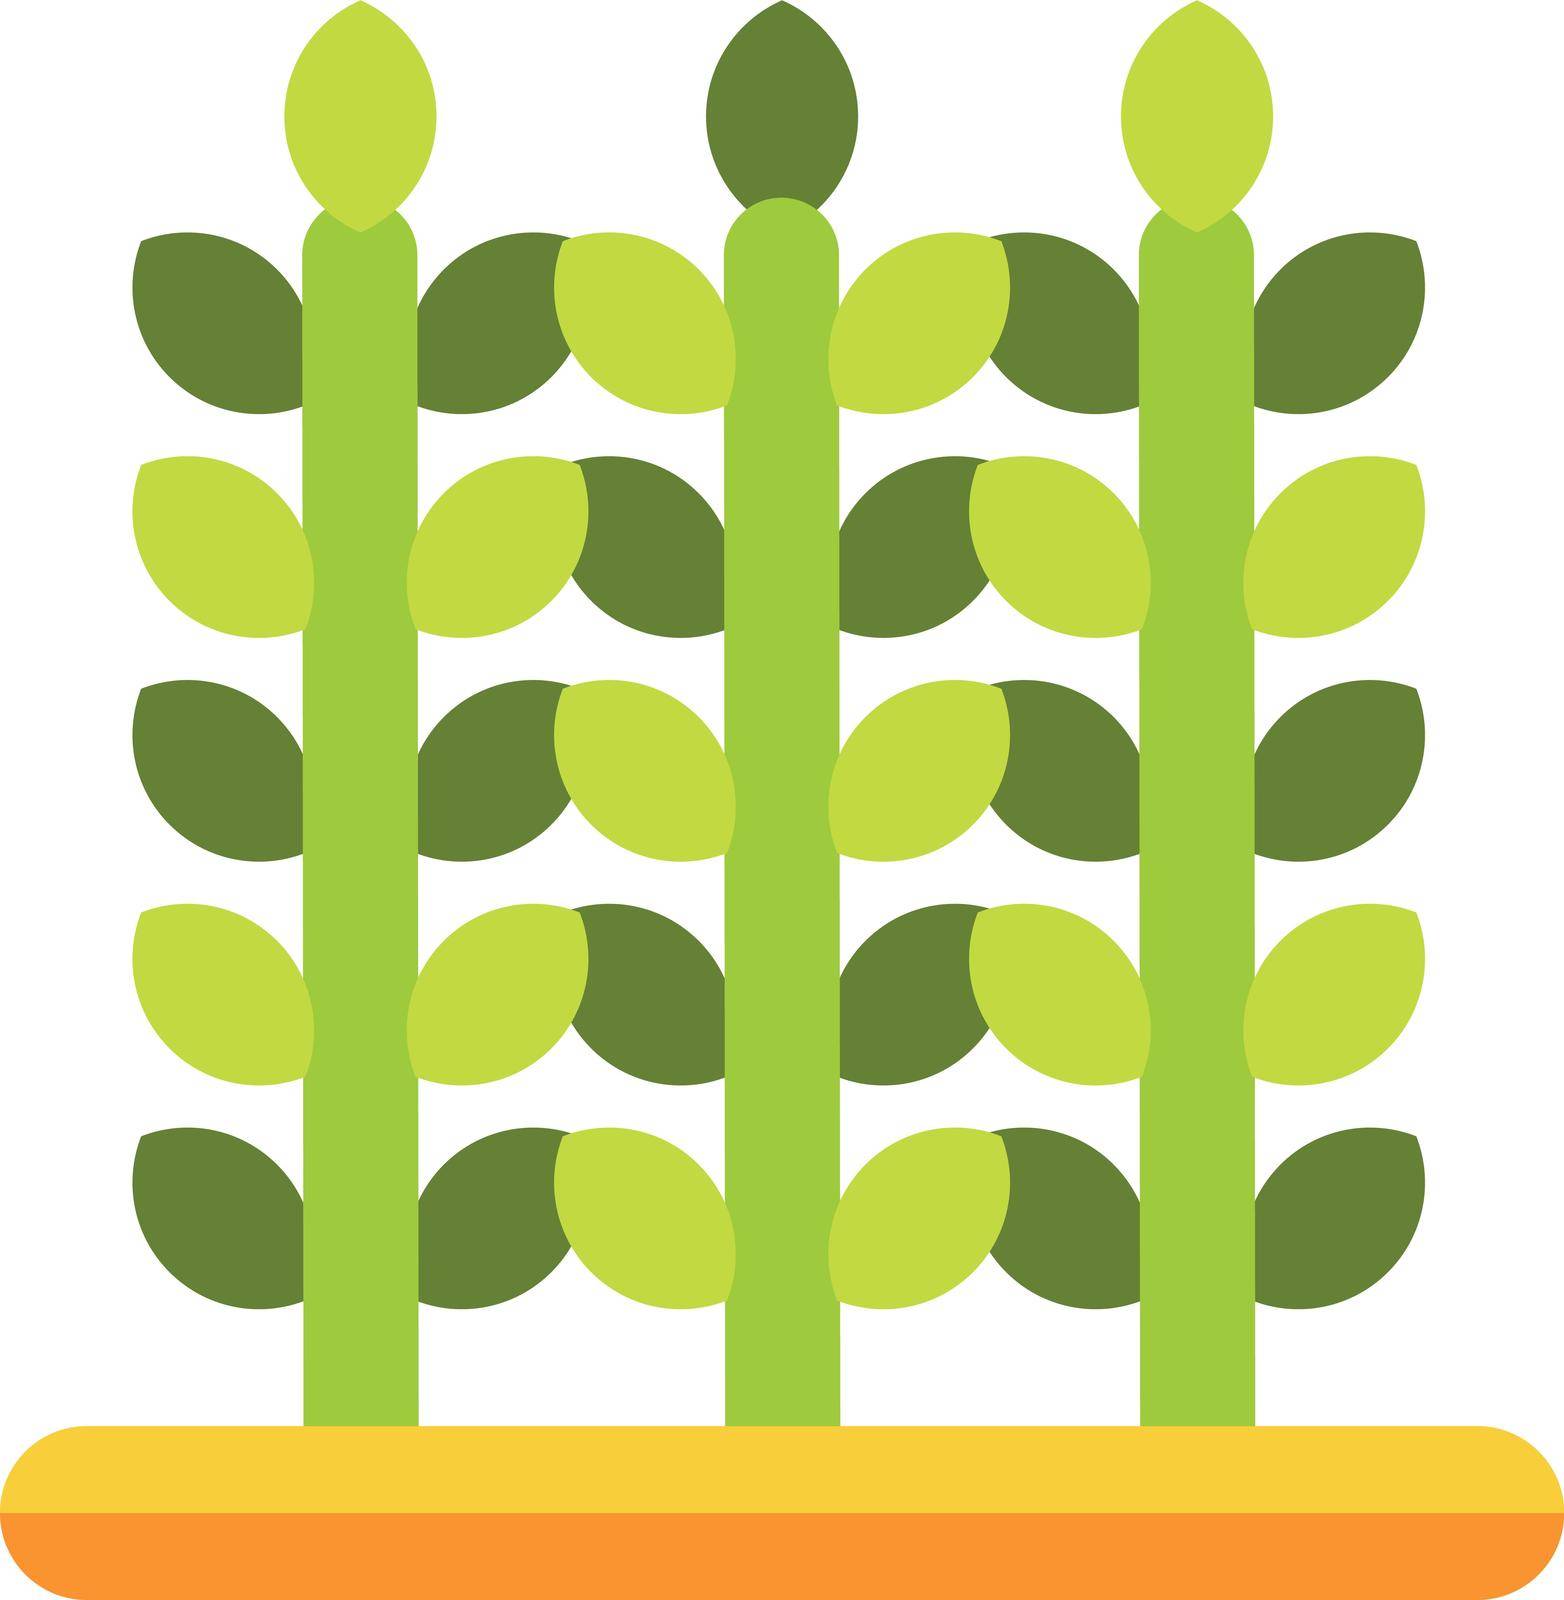 Crops icon. Green plants growing from soil ground by MicroOne